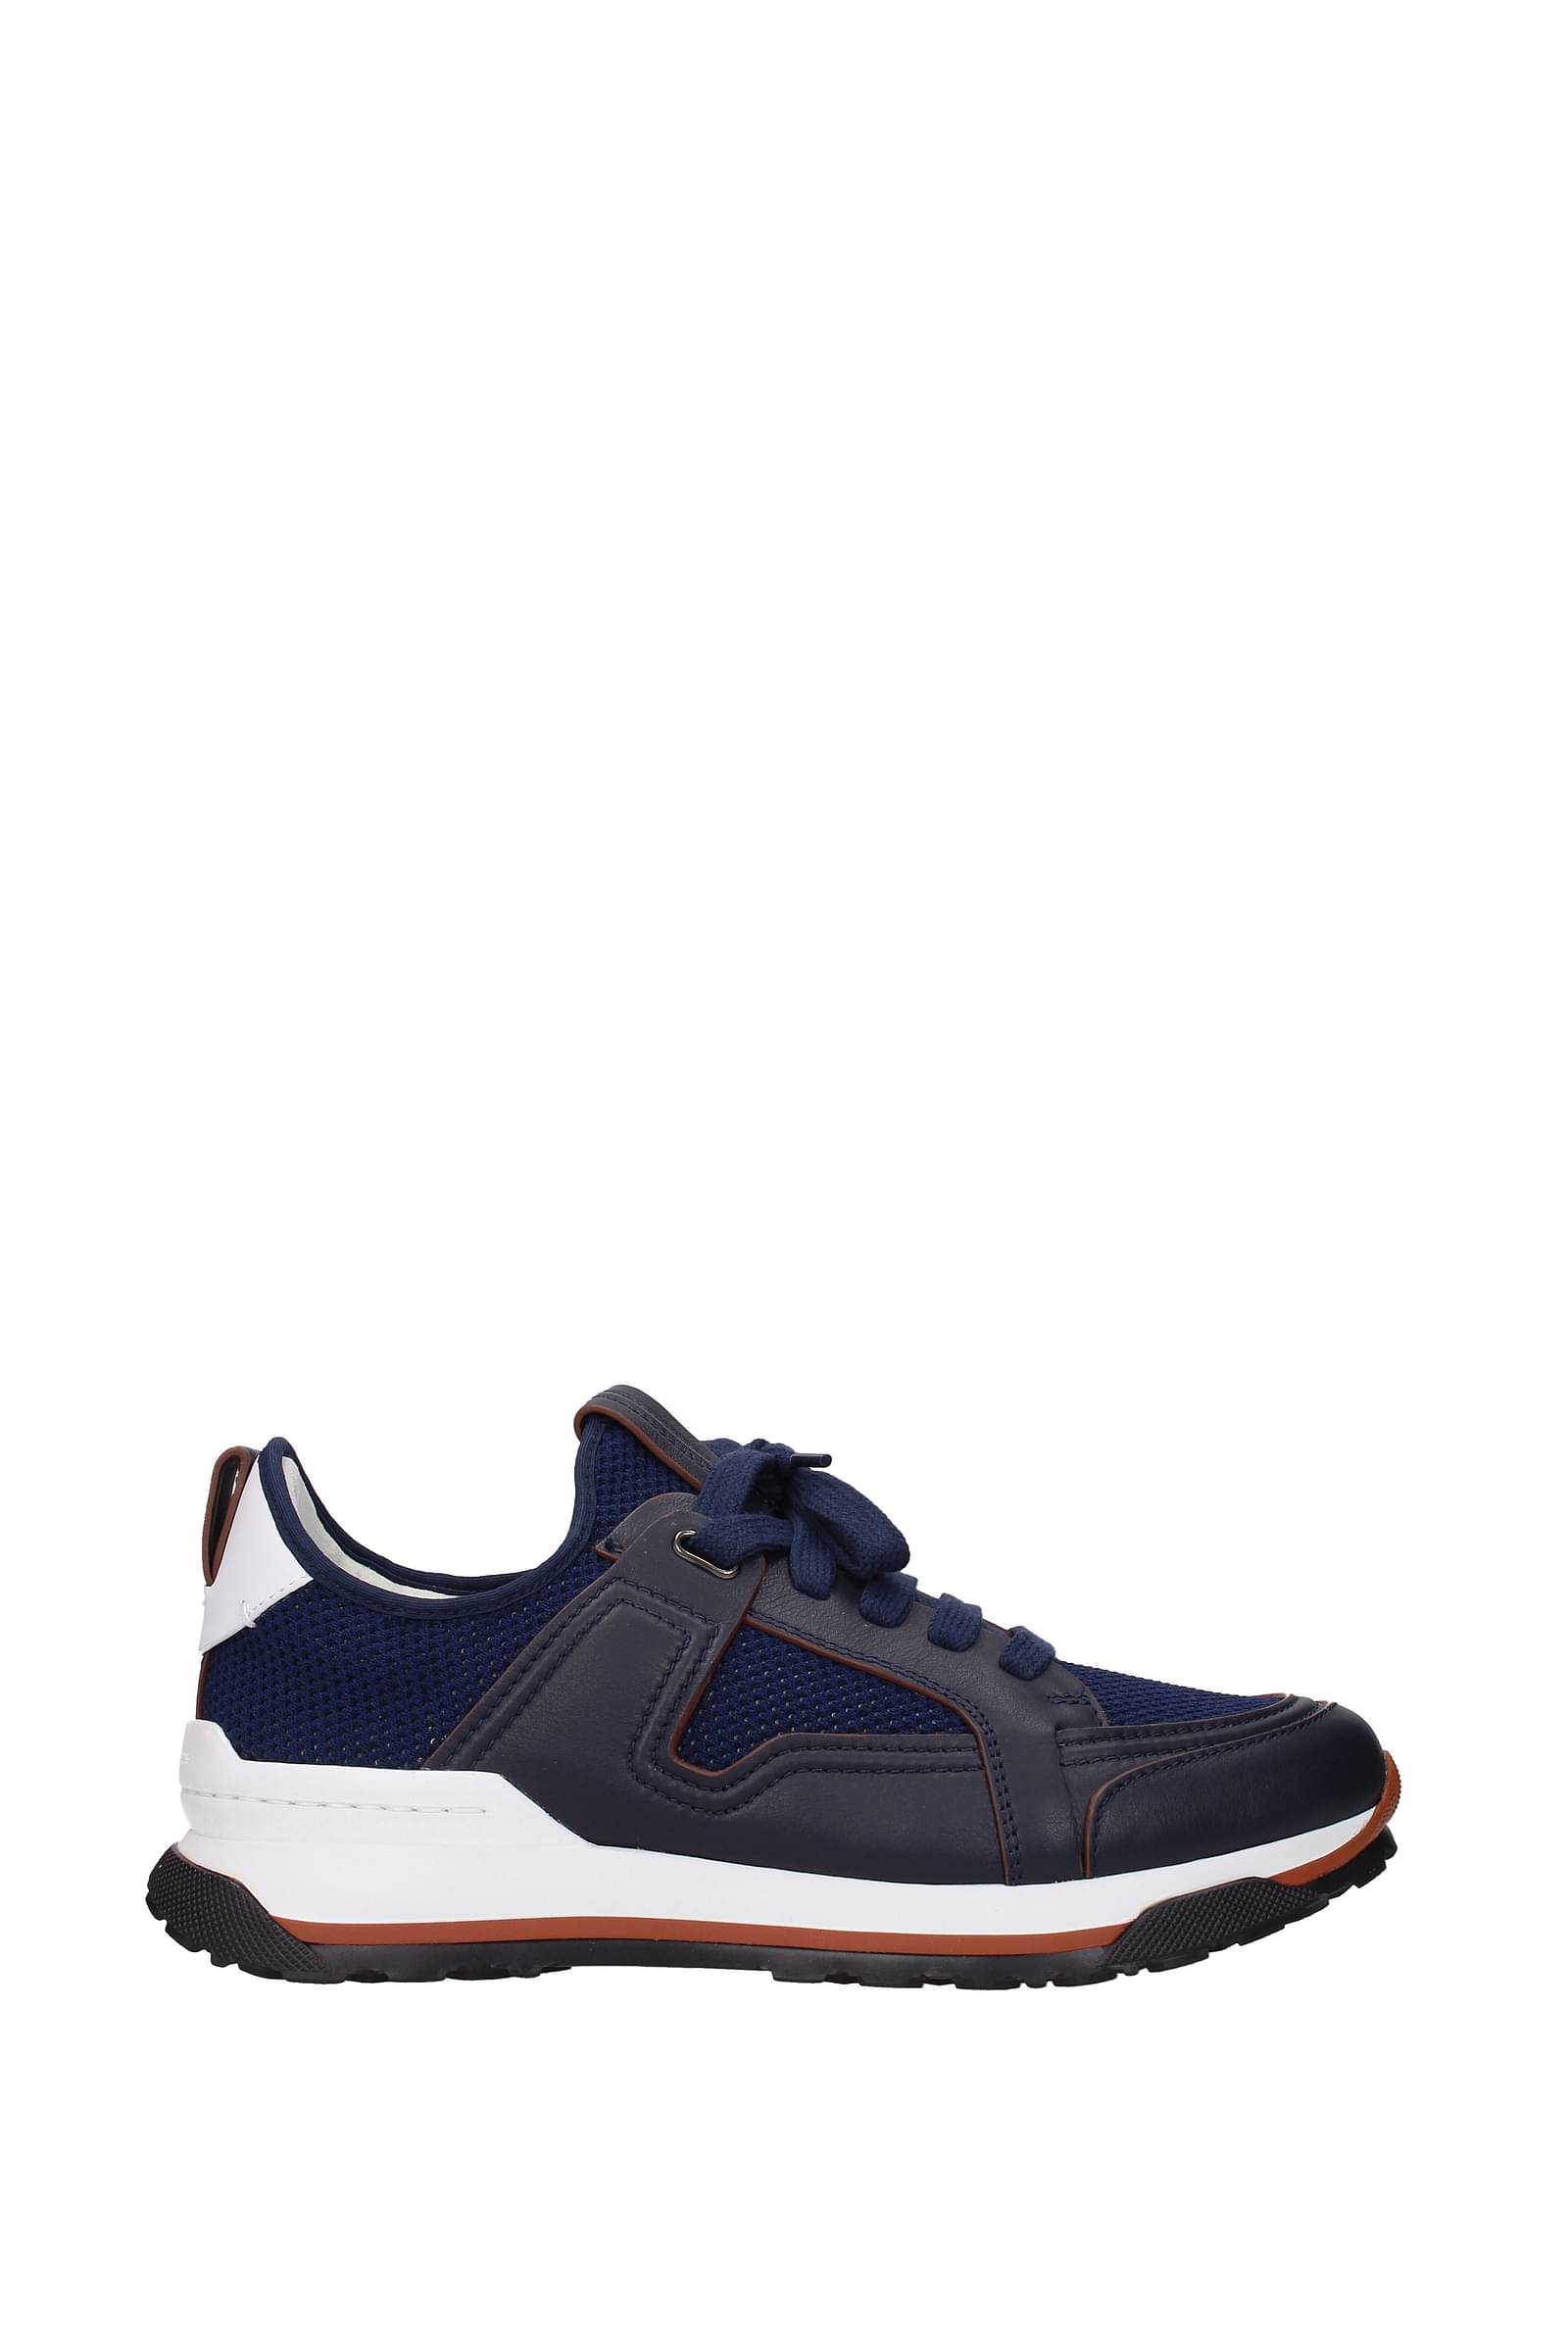 zegna sneakers on sale